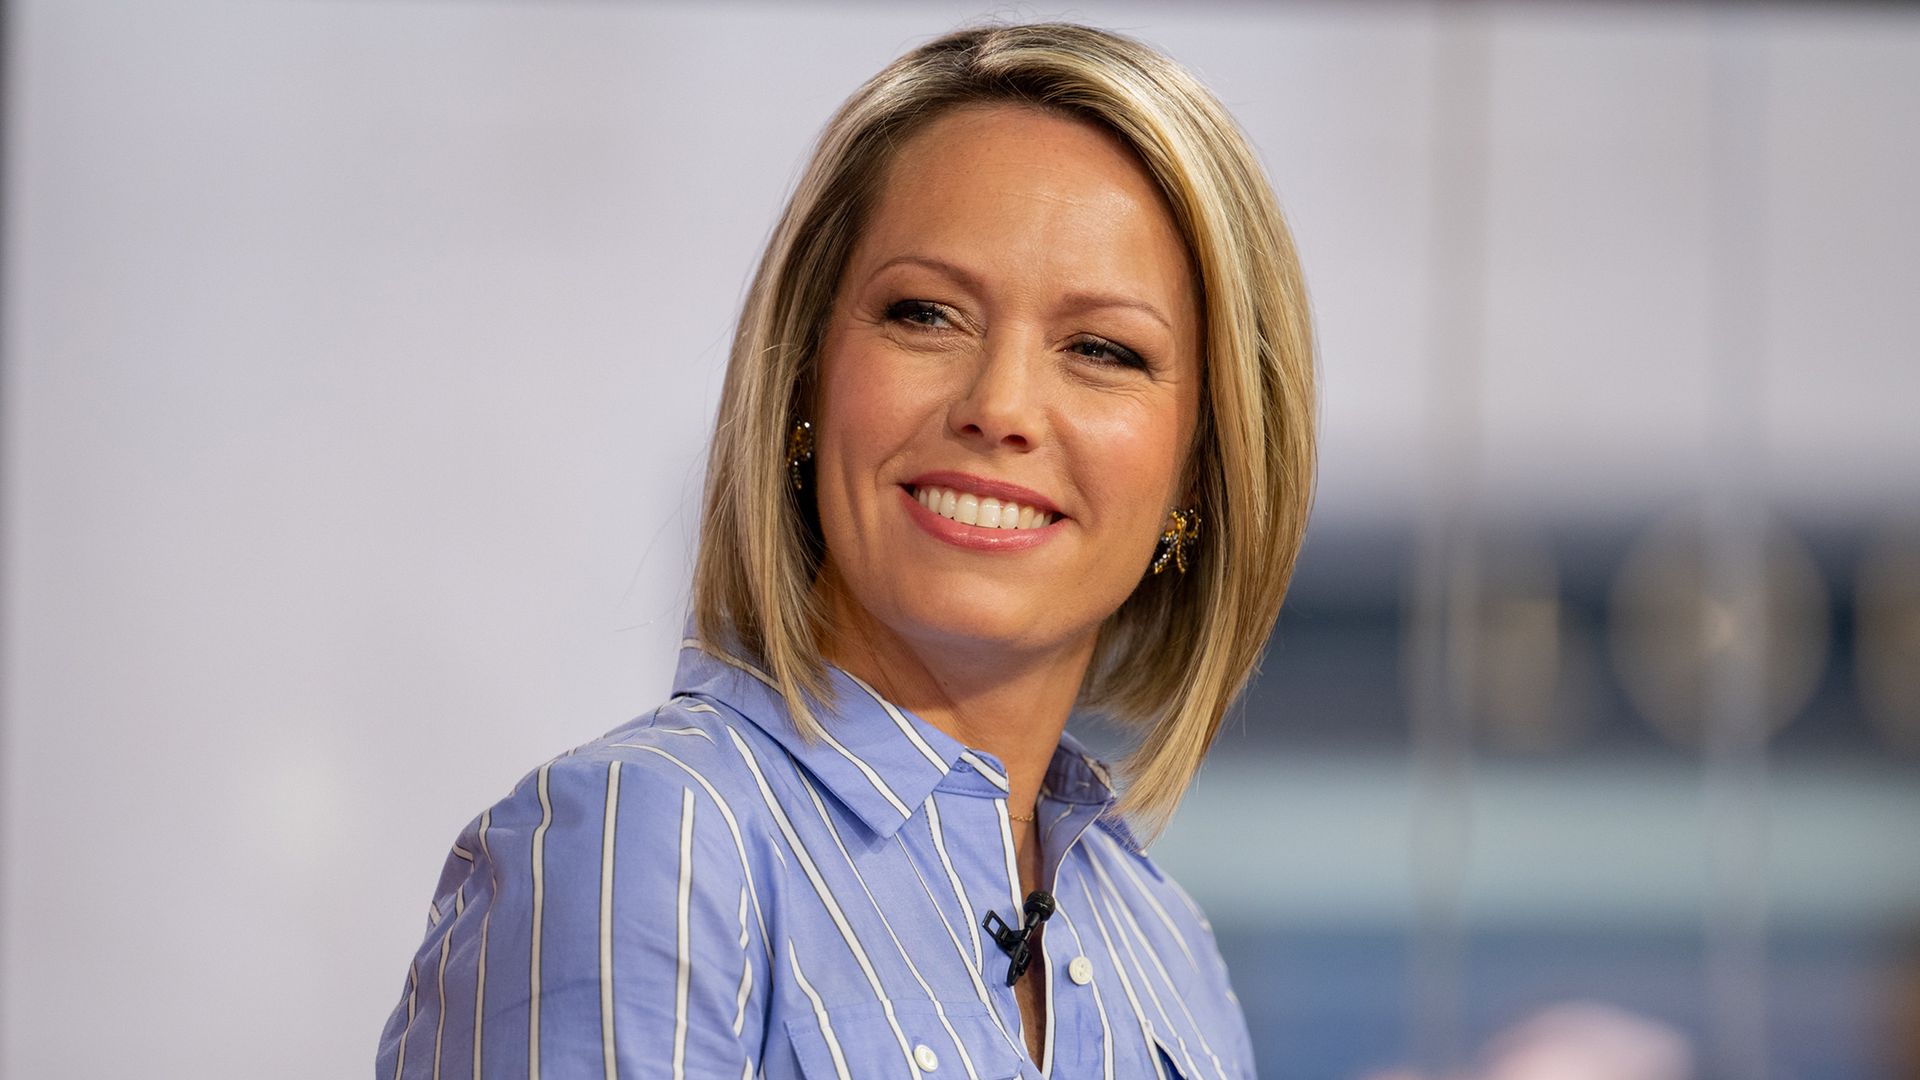 Dylan Dreyer in the Today Show studios 